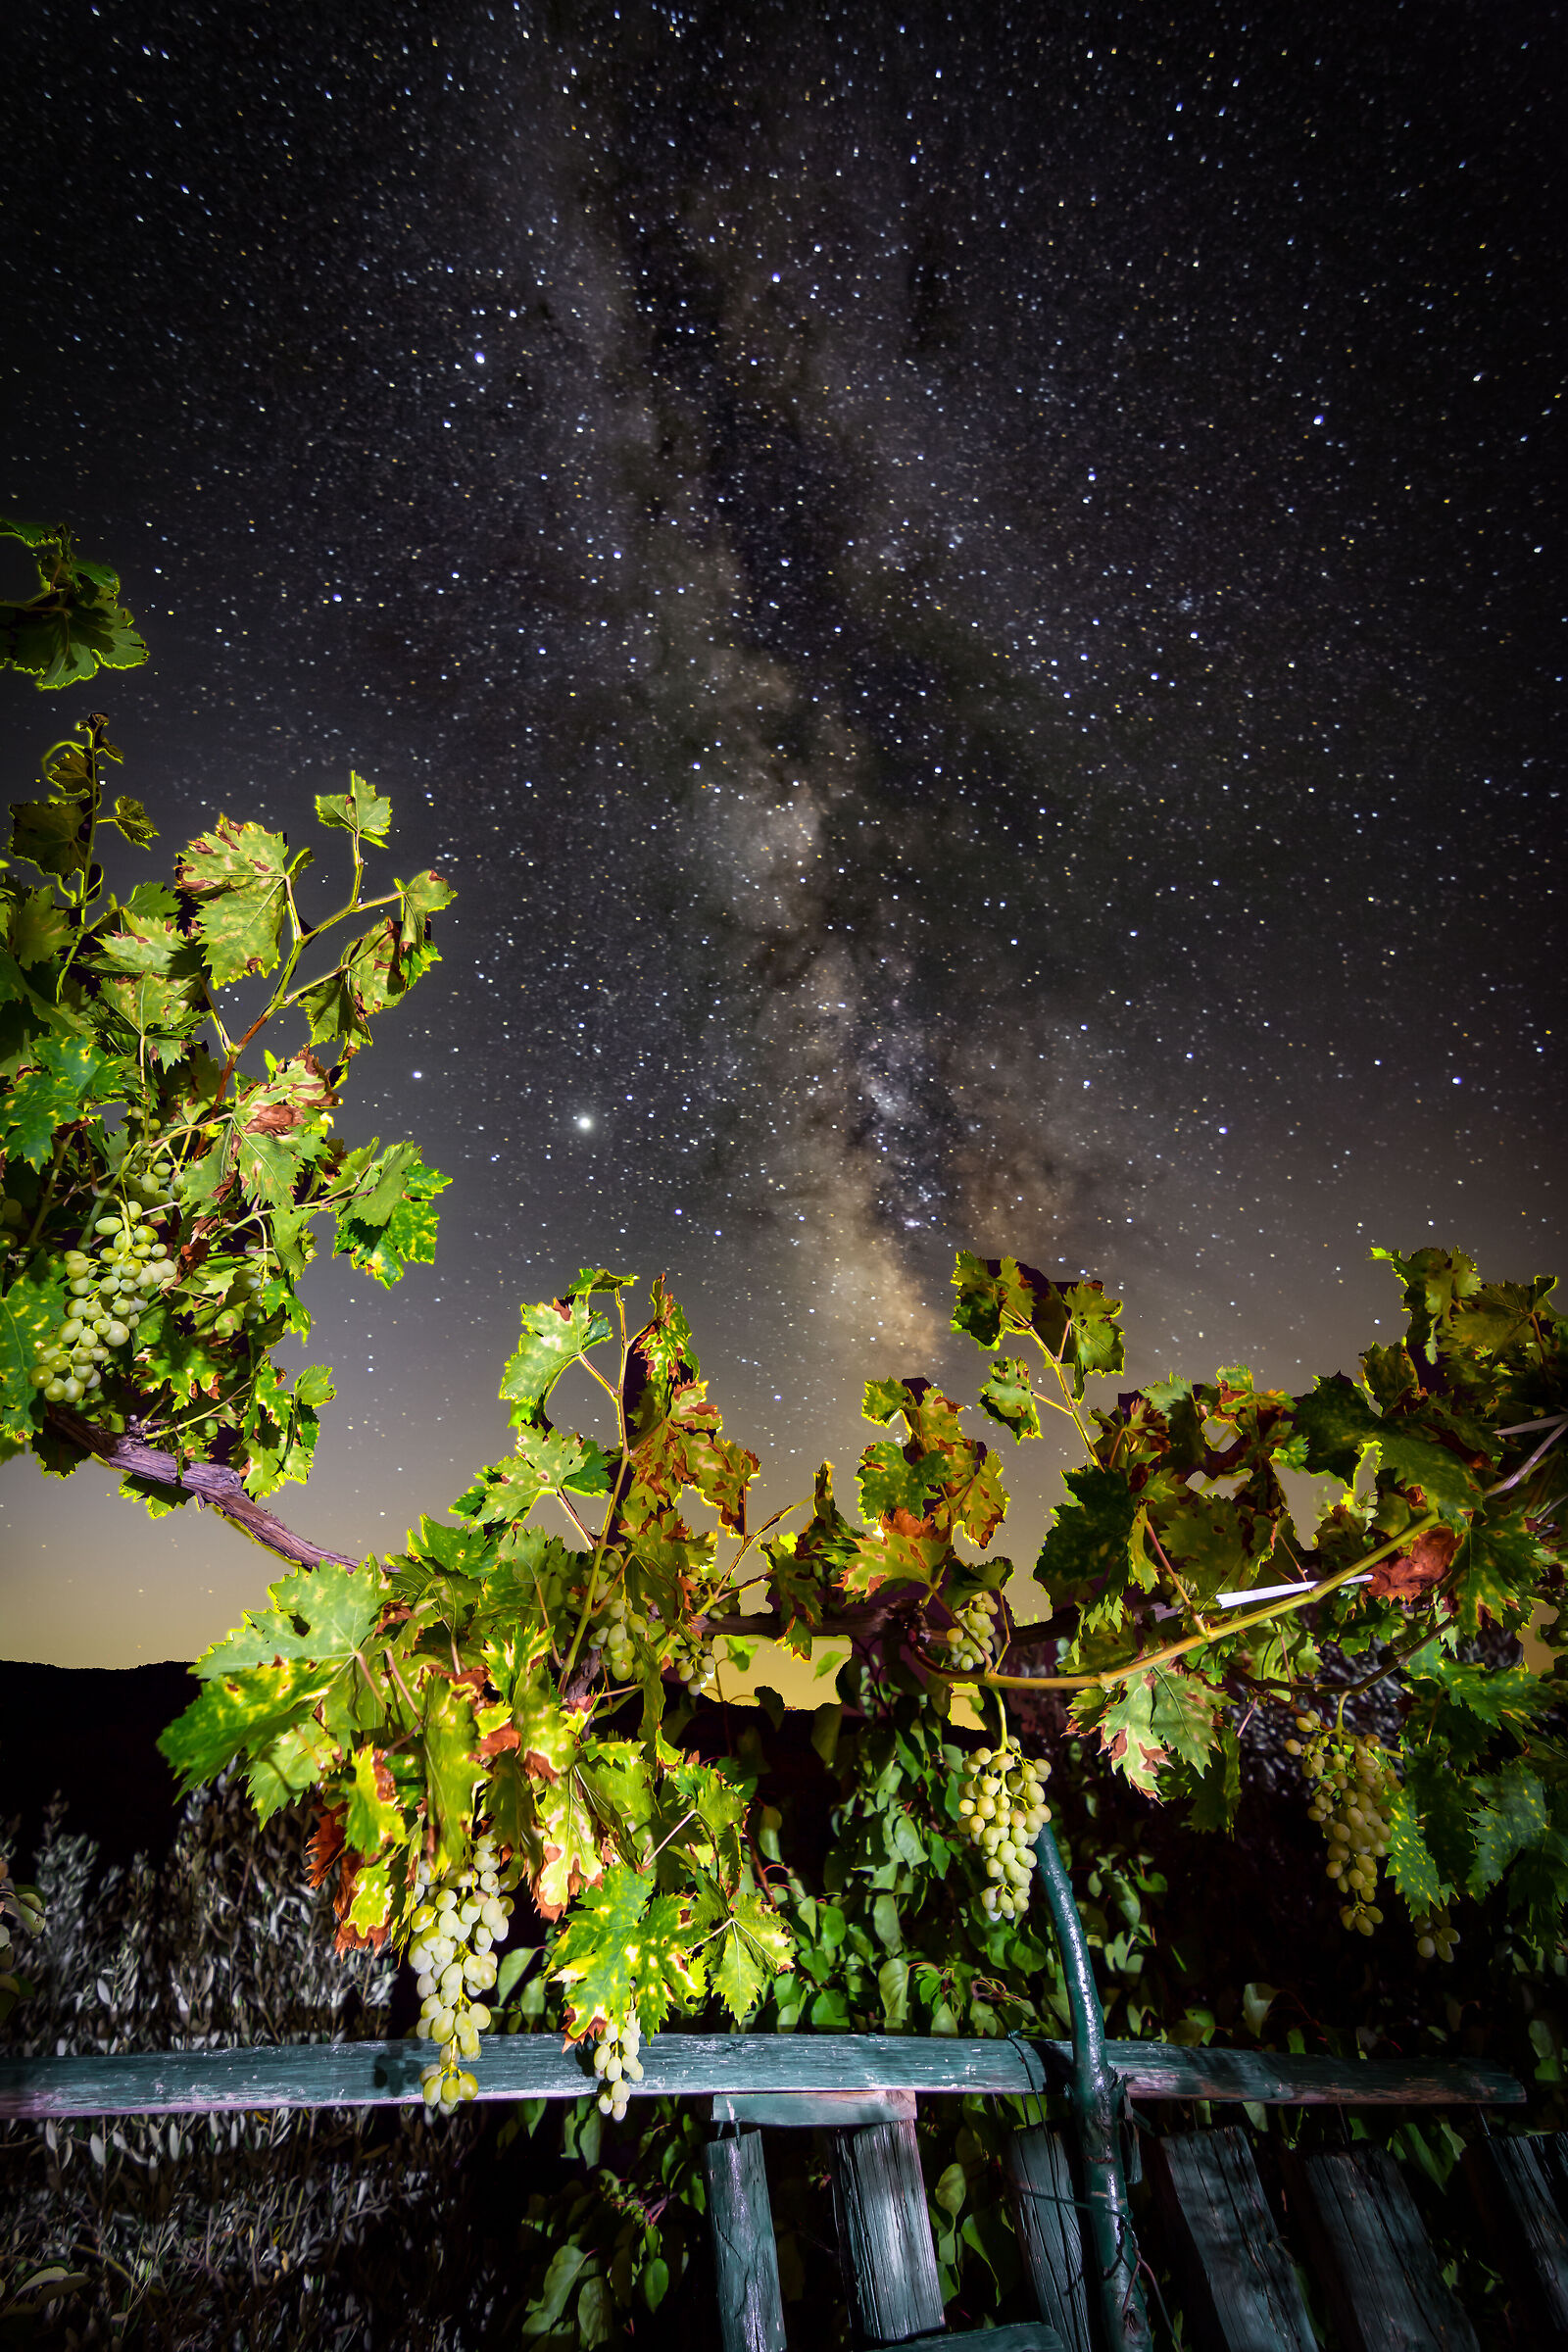 grapes and milky way...